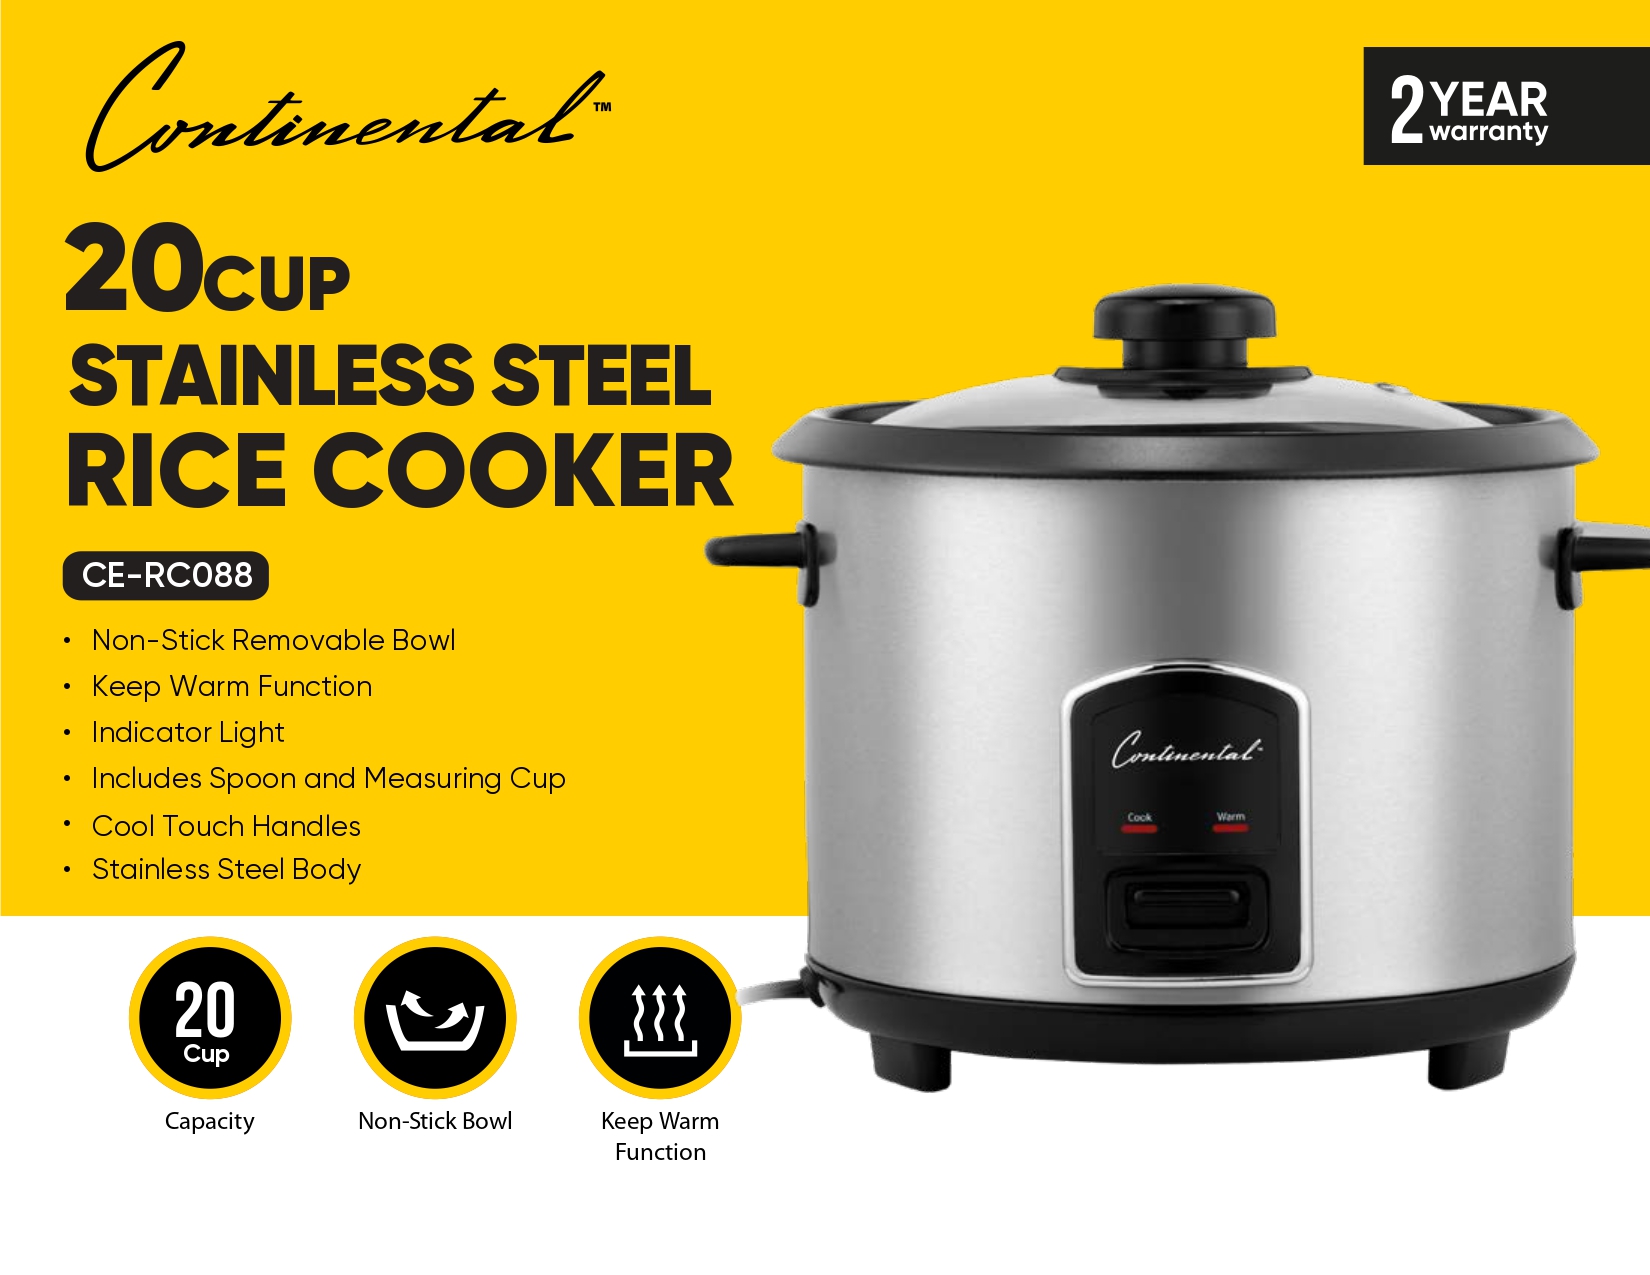 20 CUP STAINLESS STEEL RICE COOKER